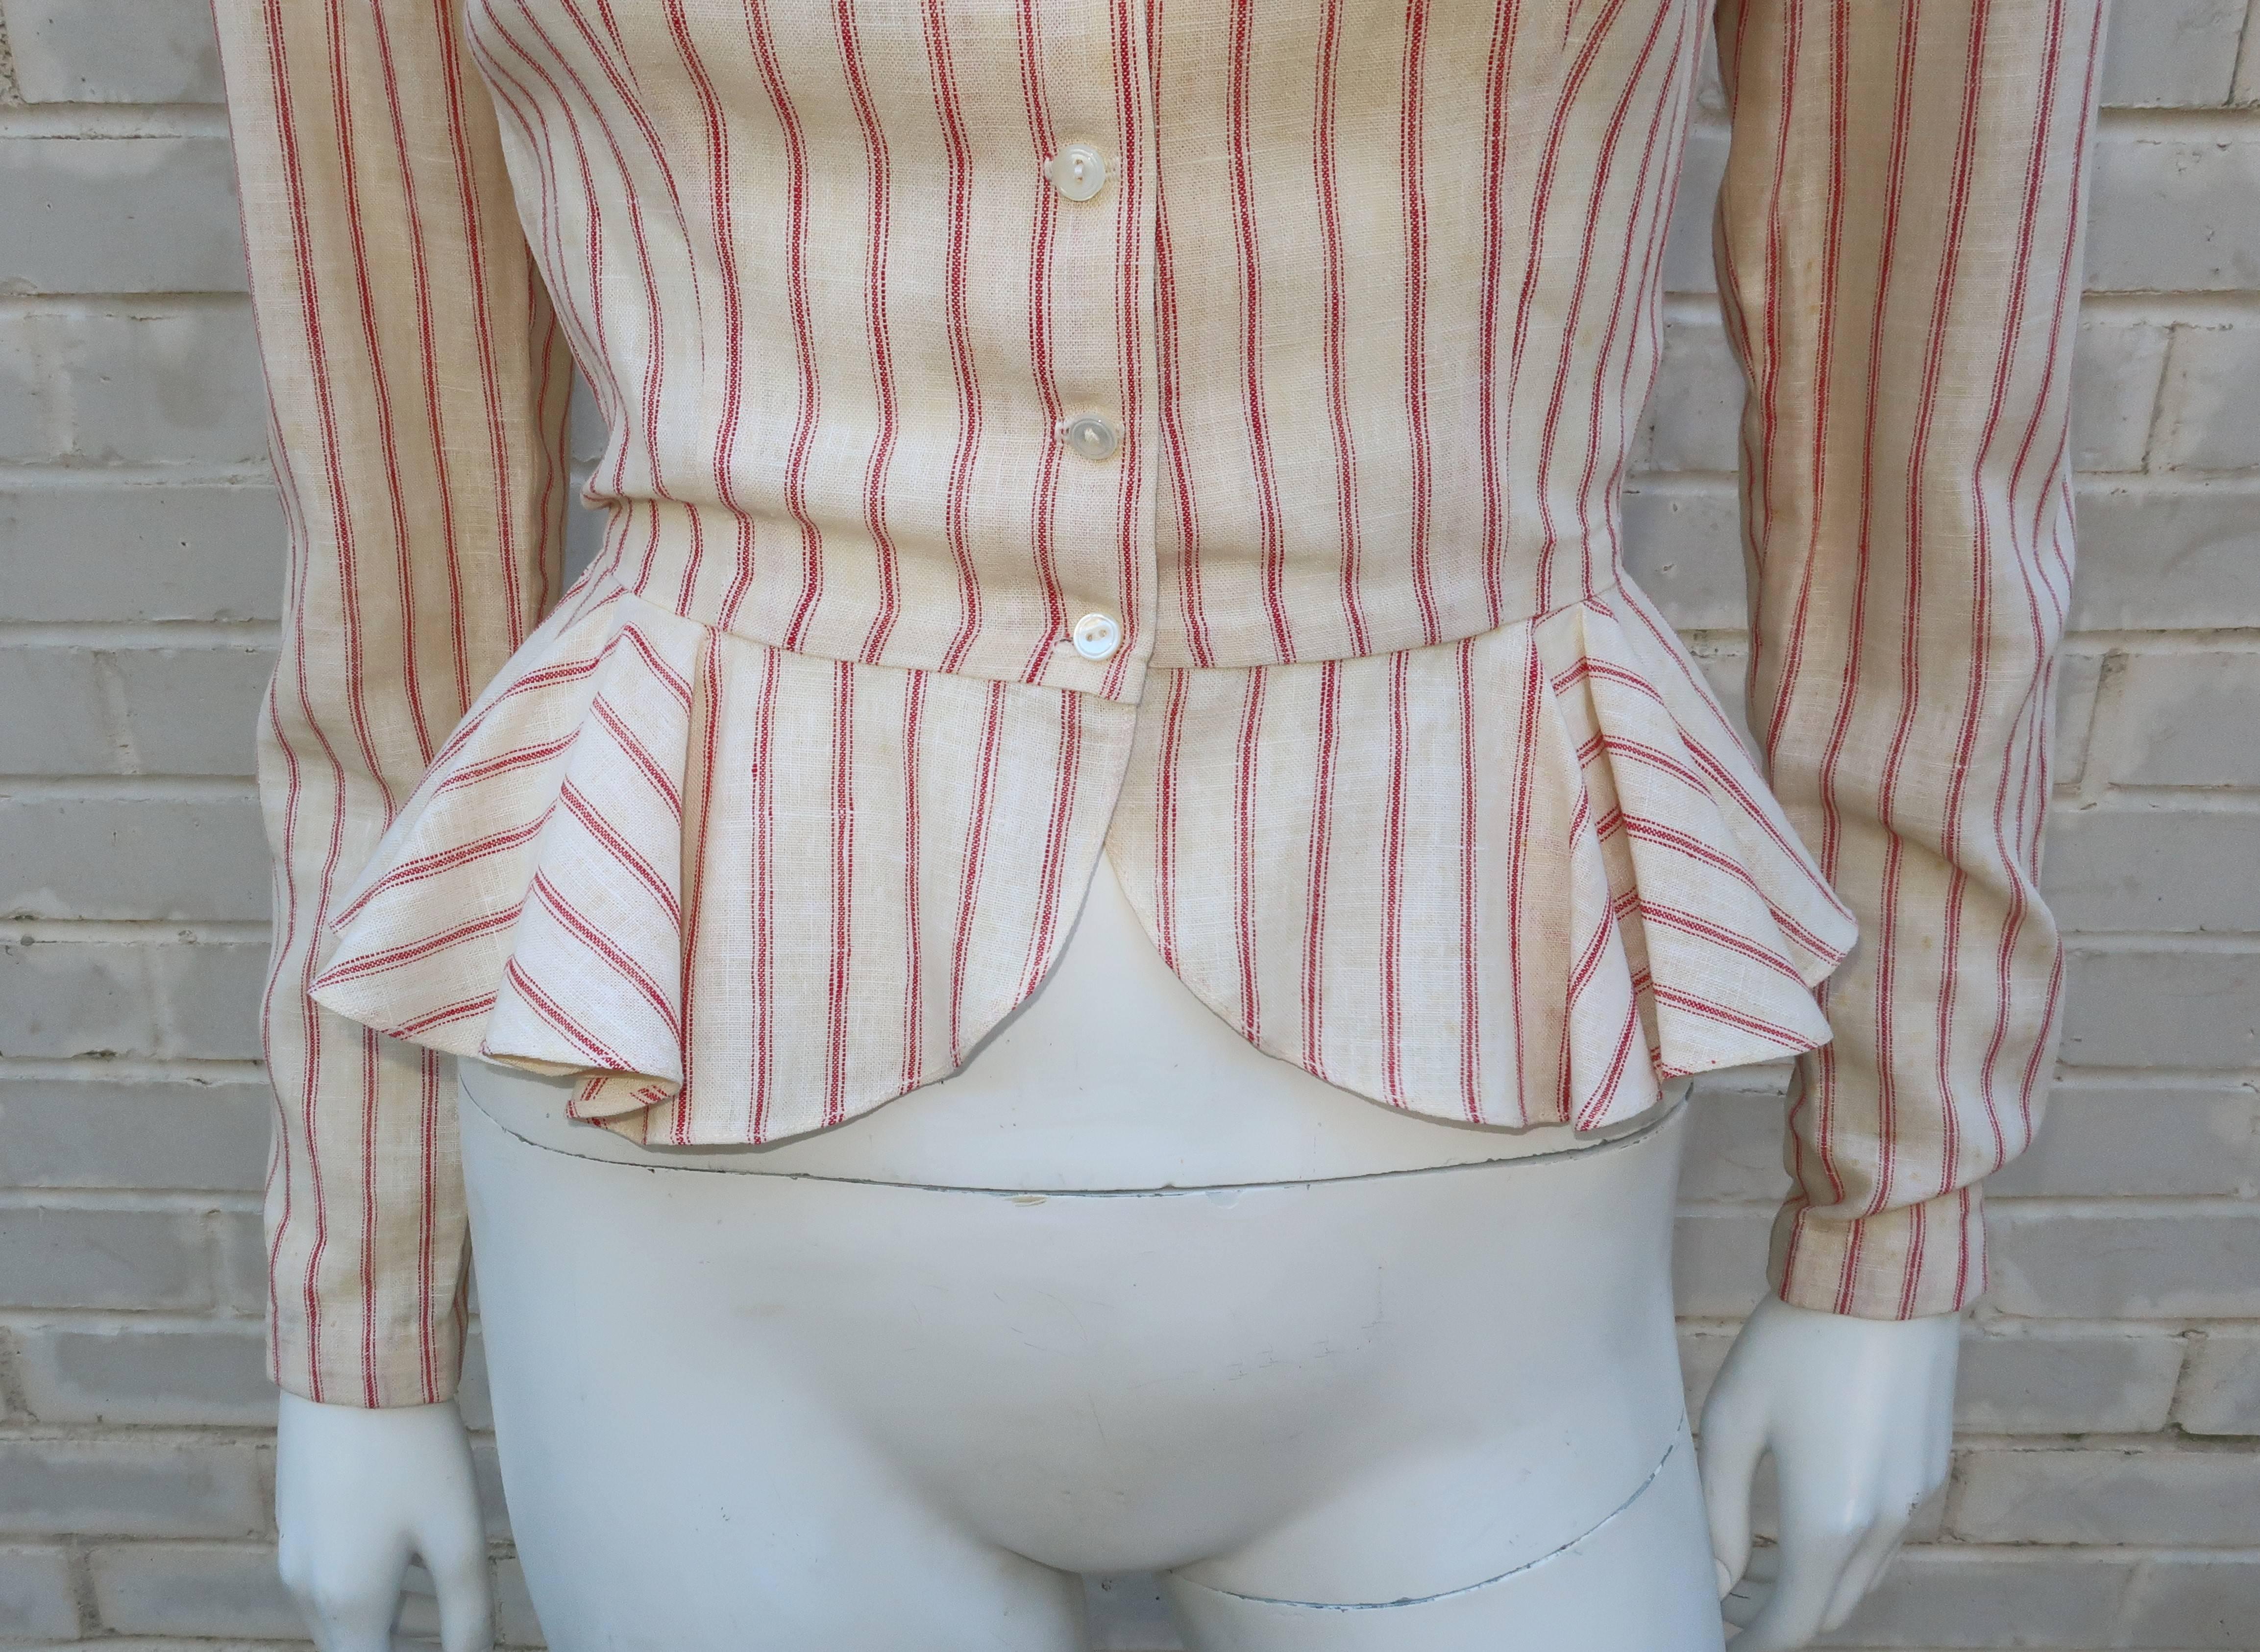 Ralph Lauren's interpretation of American Victorian styles never gets old.  This 1970's red pinstriped linen top has a decidedly feminine peplum silhouette though there is also a menswear element to the design.  The fabric is reminiscent of ticking